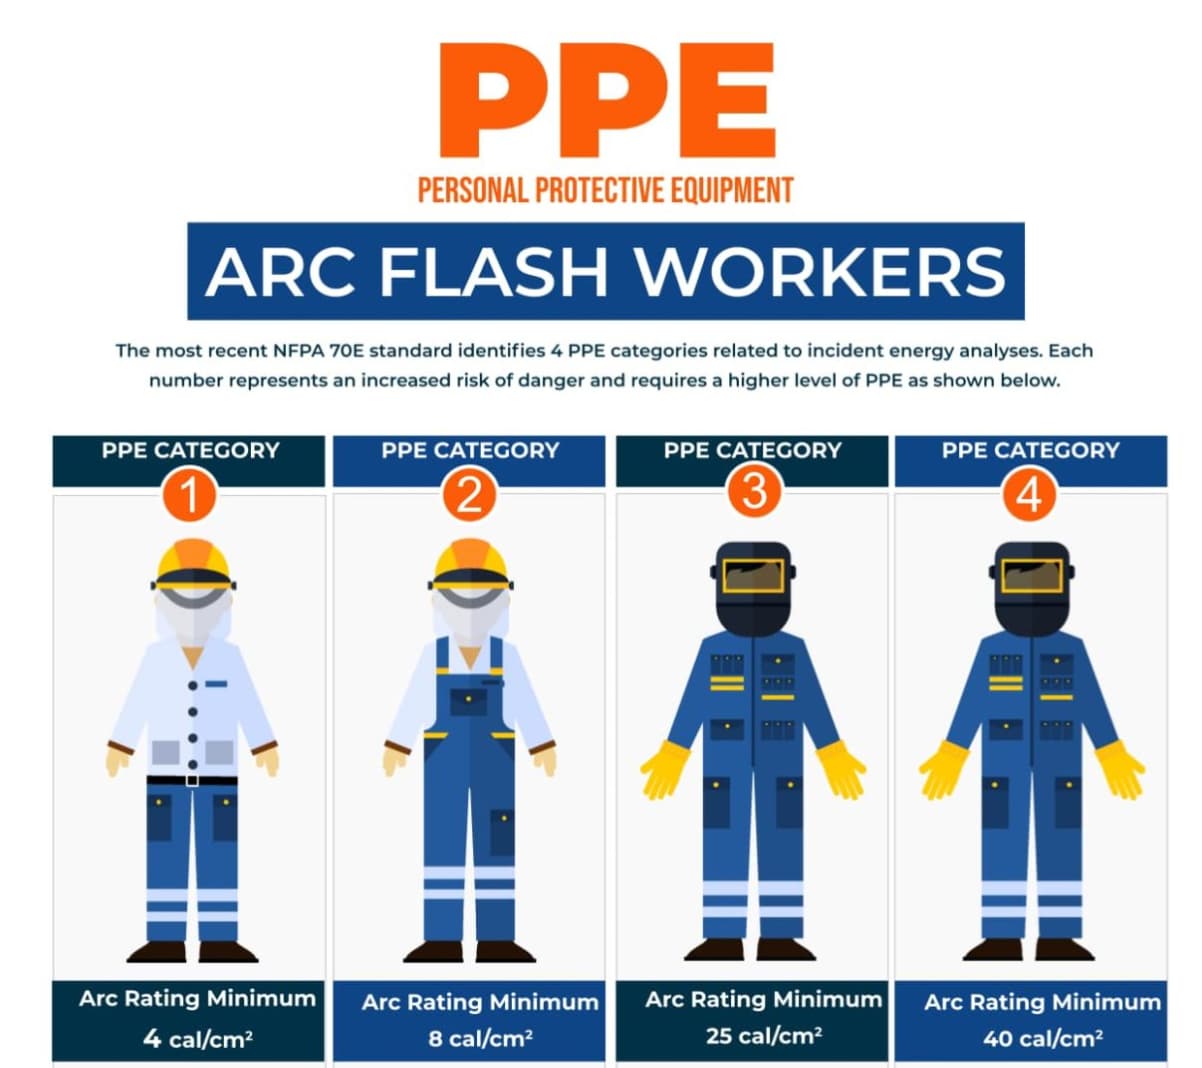 PPE for Arc Flash Workers - Pioneer Power Group